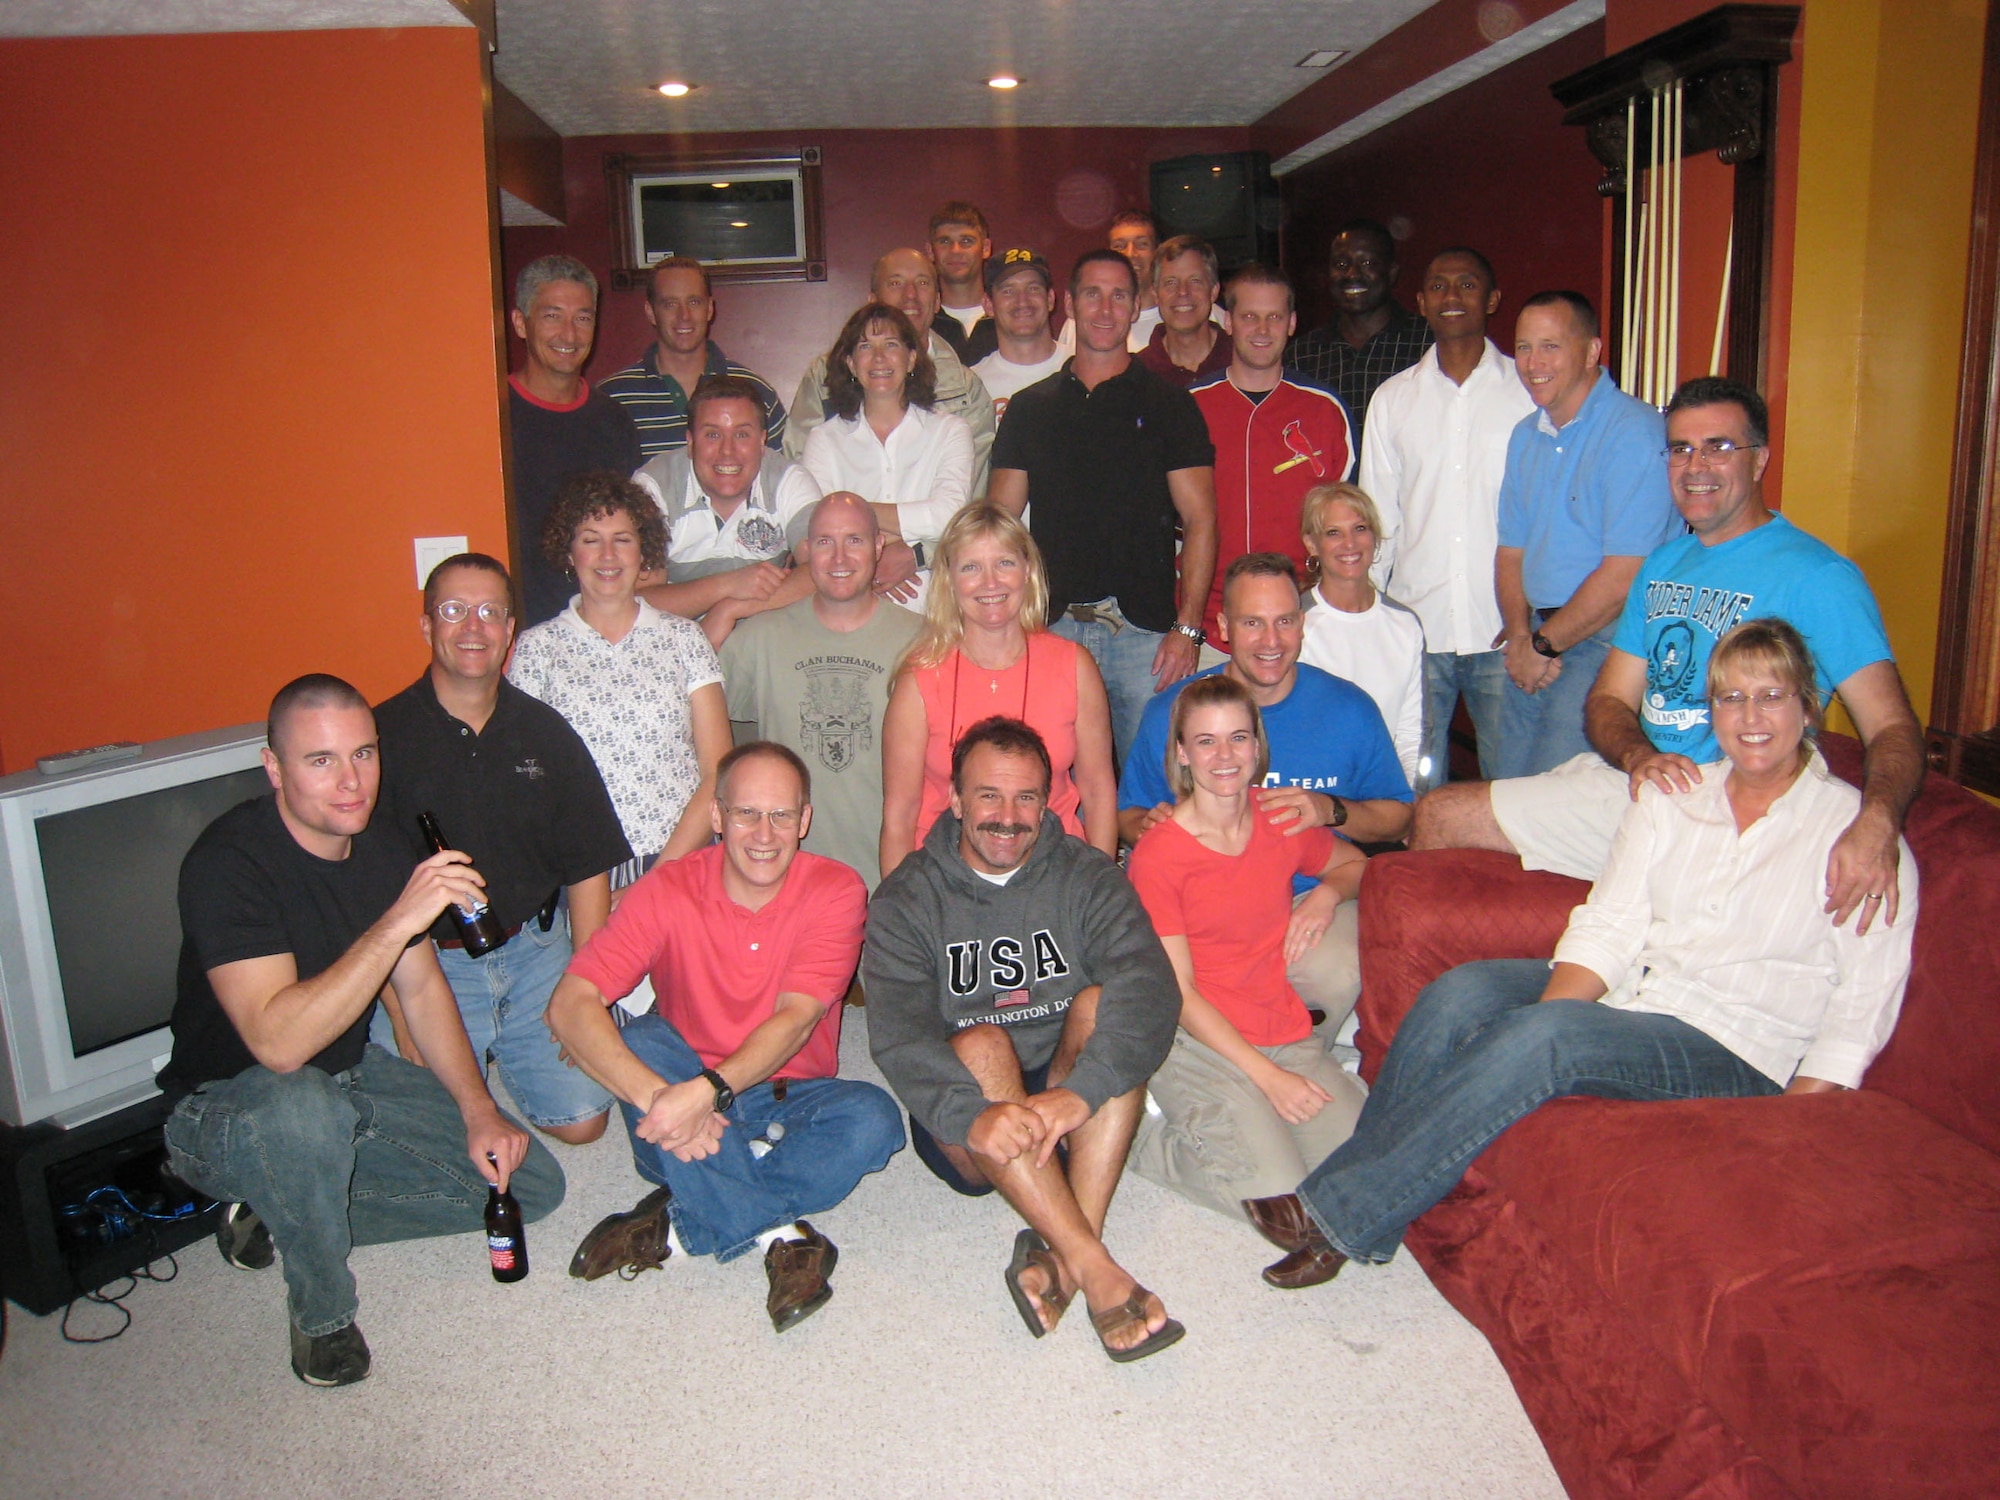 All of the Arnold runners met up for a pasta dinner at the Ohio home of Arnold Engineering Development Center's Executive Director Ricky Peters the night before the 11th annual Air Force Marathon.